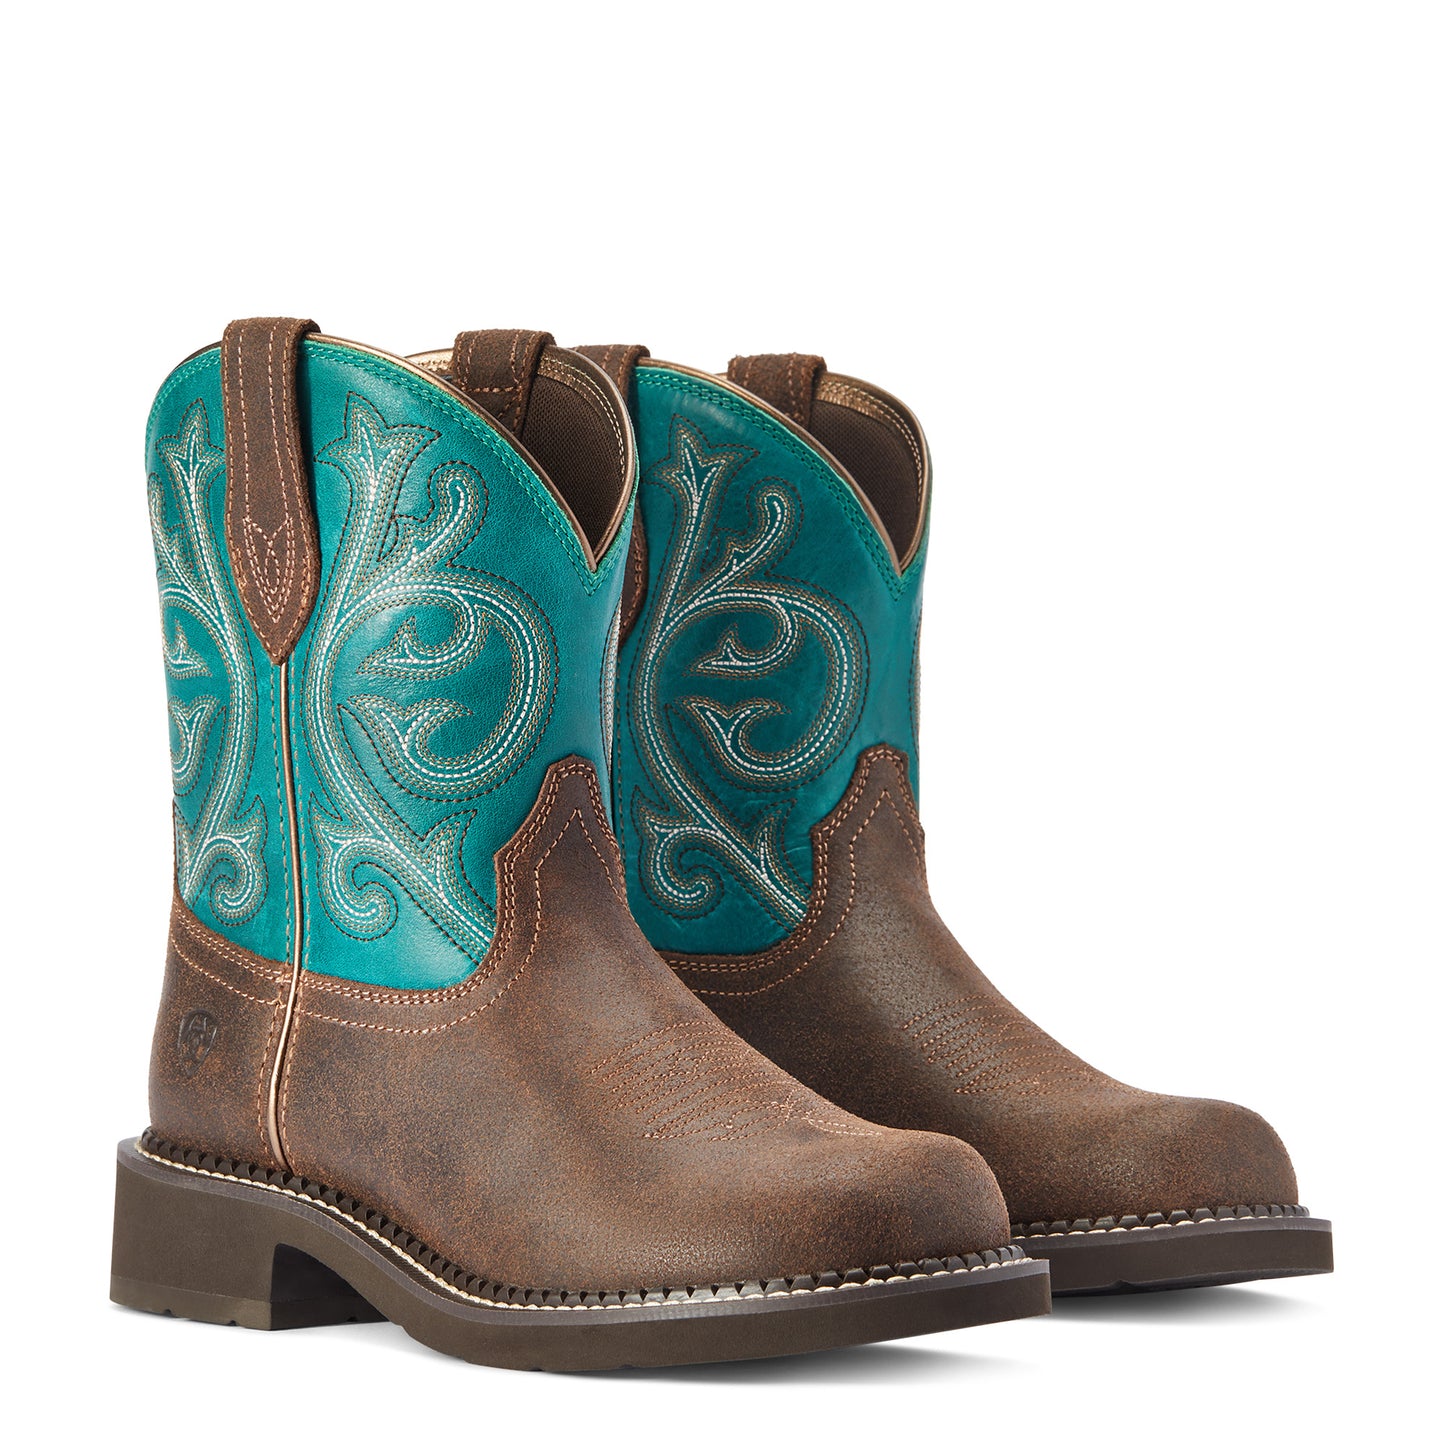 Ariat® Ladies Fatbaby Heritage Worn Hickory & Shamrock Boots 10042463